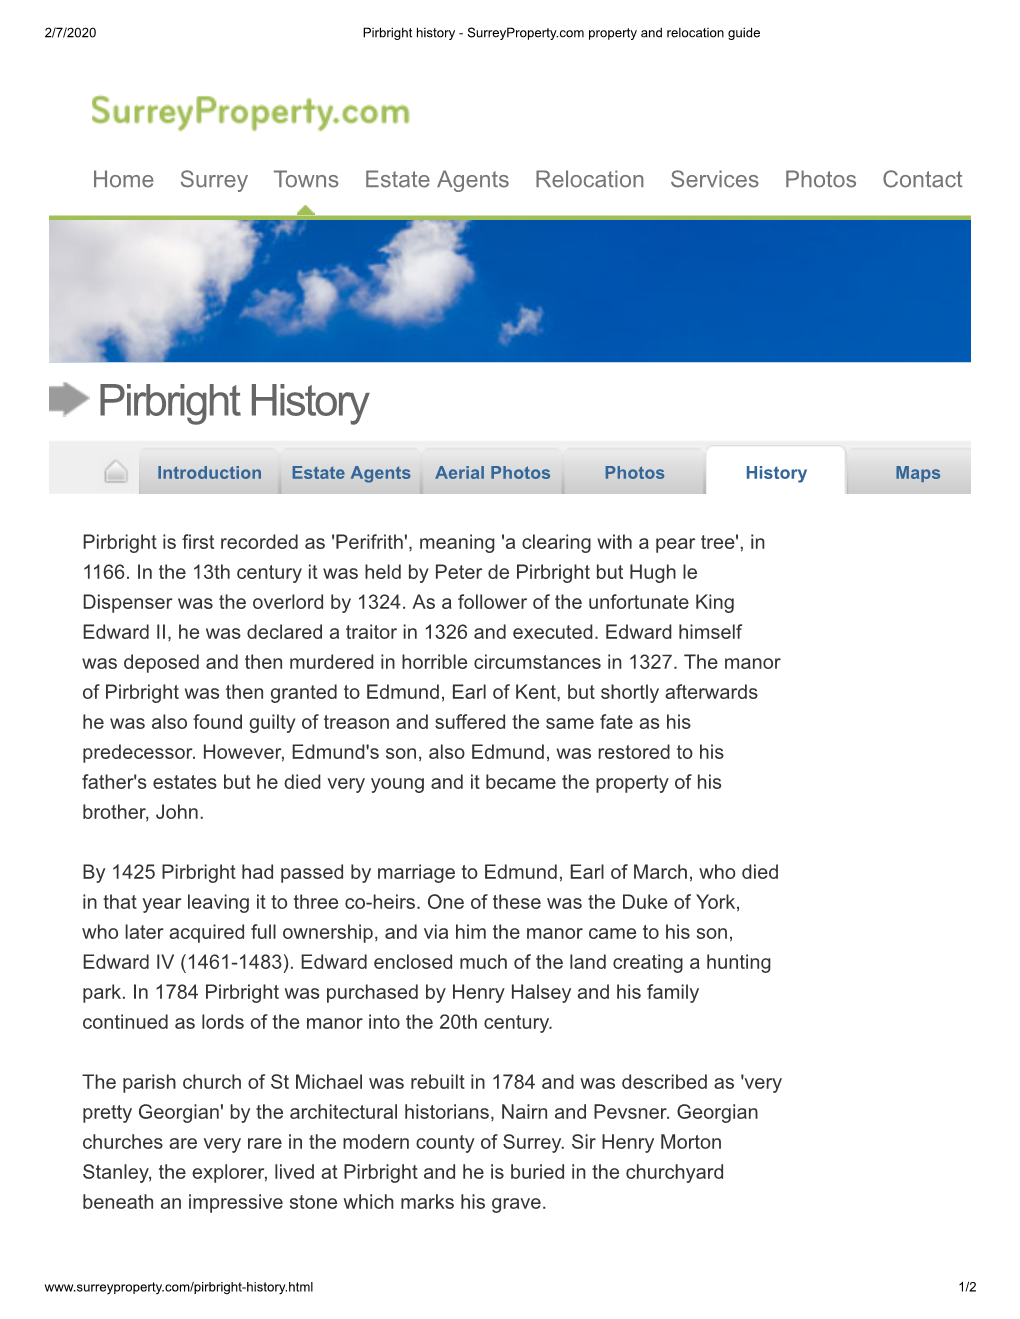 Pirbright History - Surreyproperty.Com Property and Relocation Guide